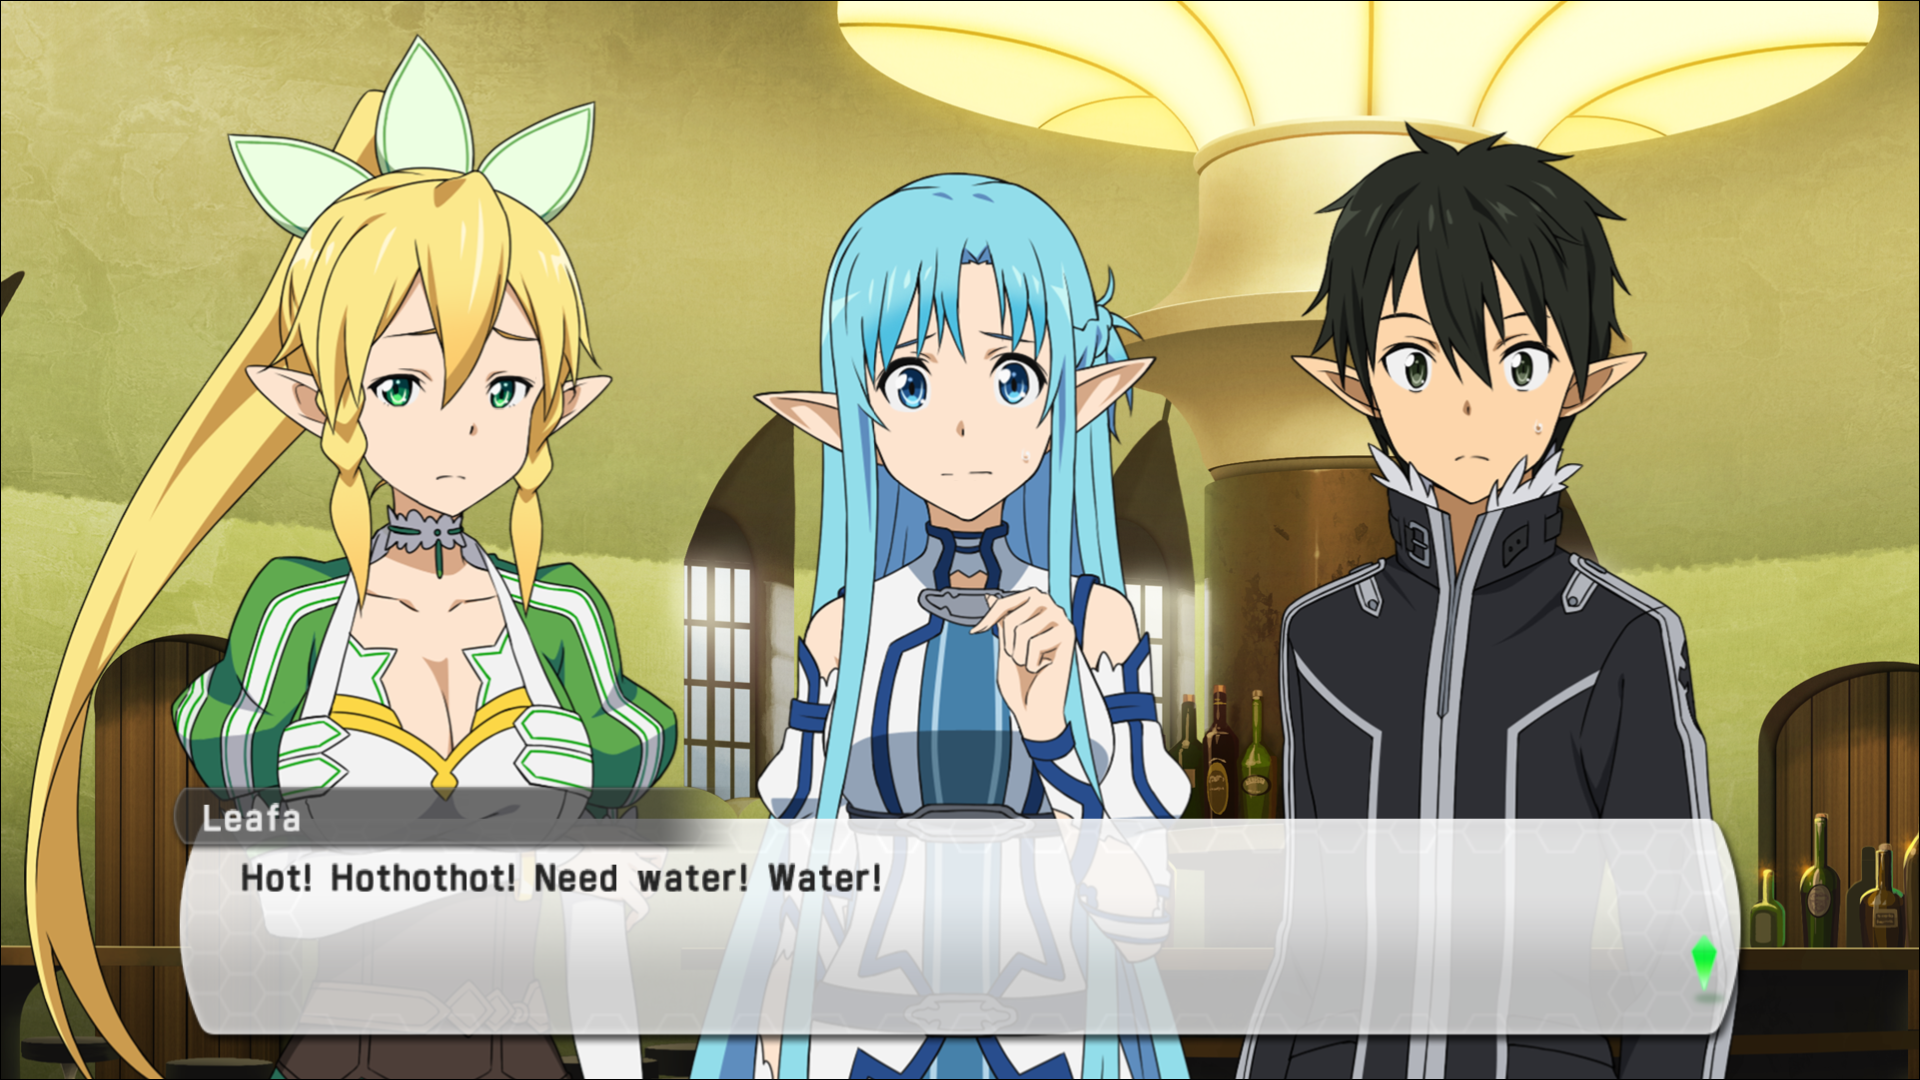 Sword Art Online: Lost Song - An Ode to SAO (Review) 